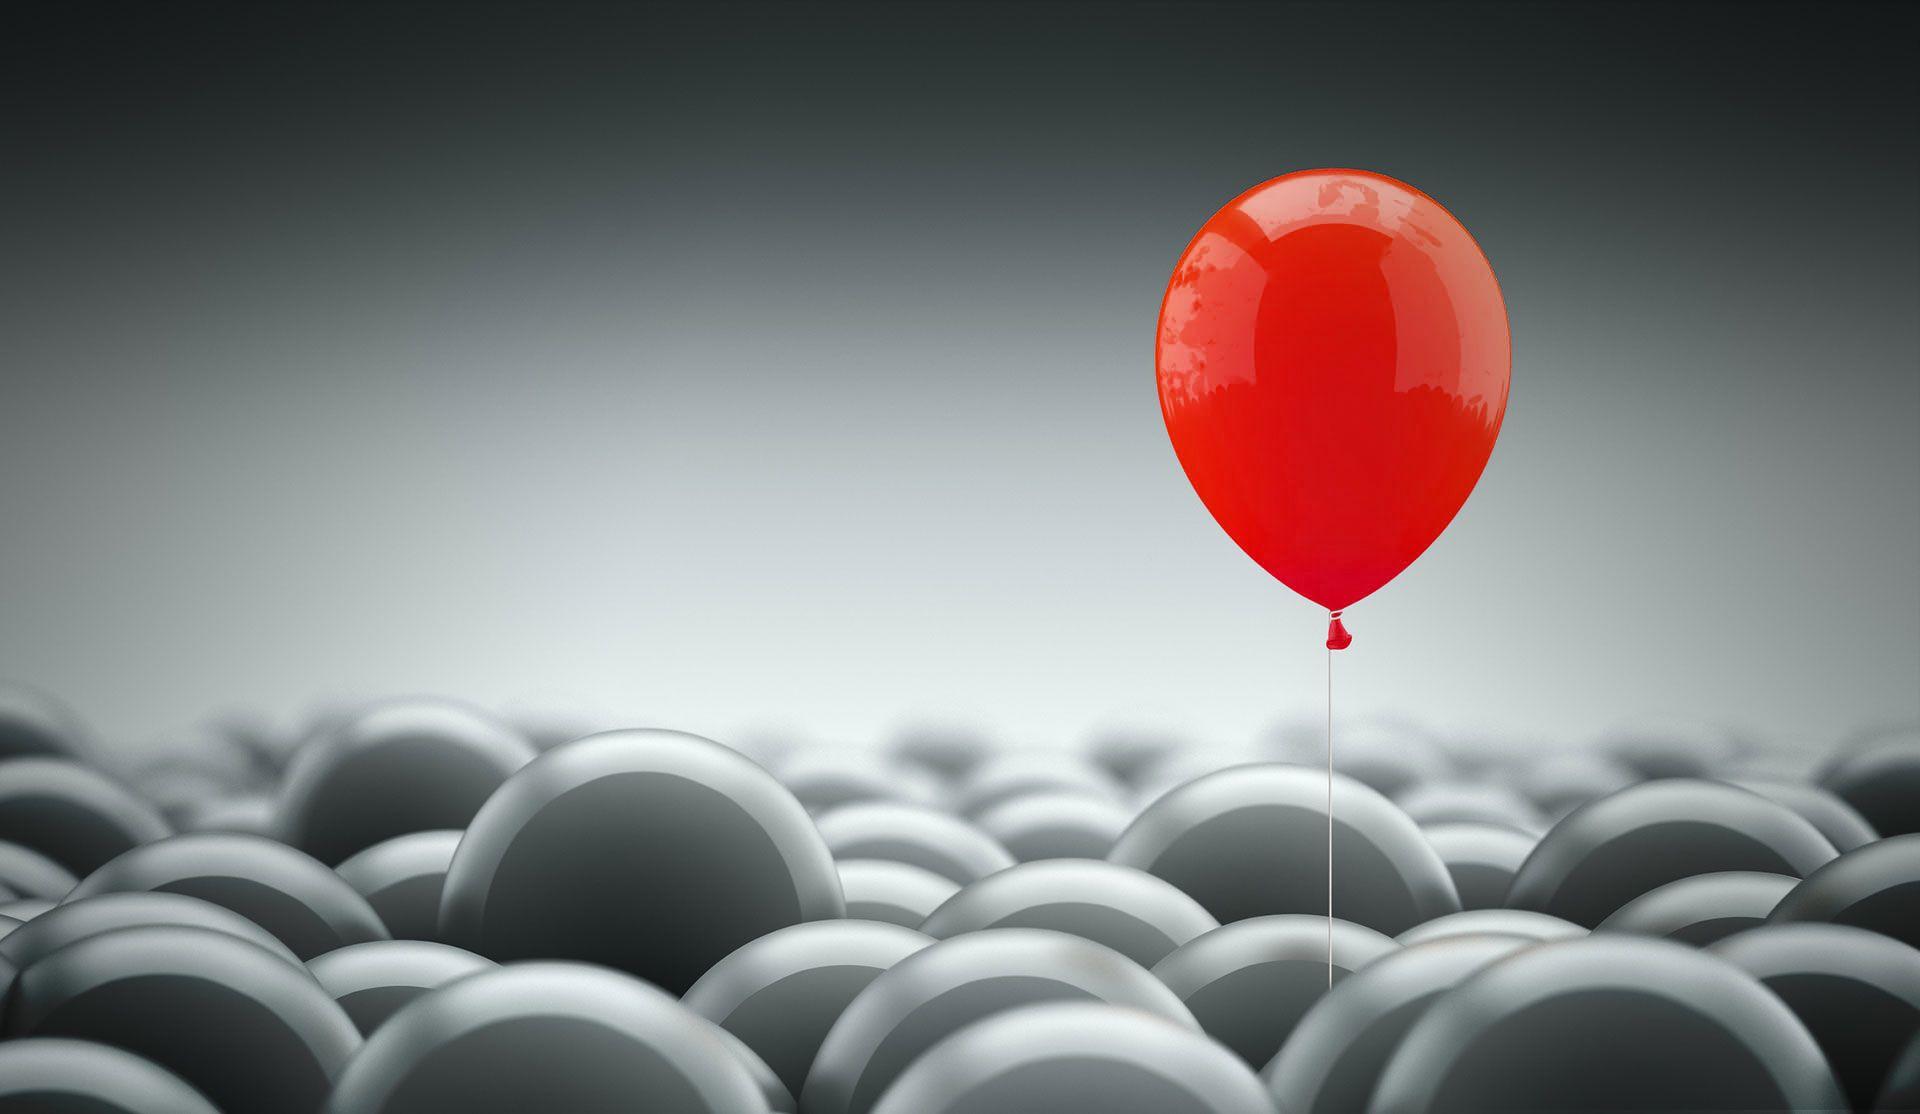 one red balloon emerging from a sea of grey balloons